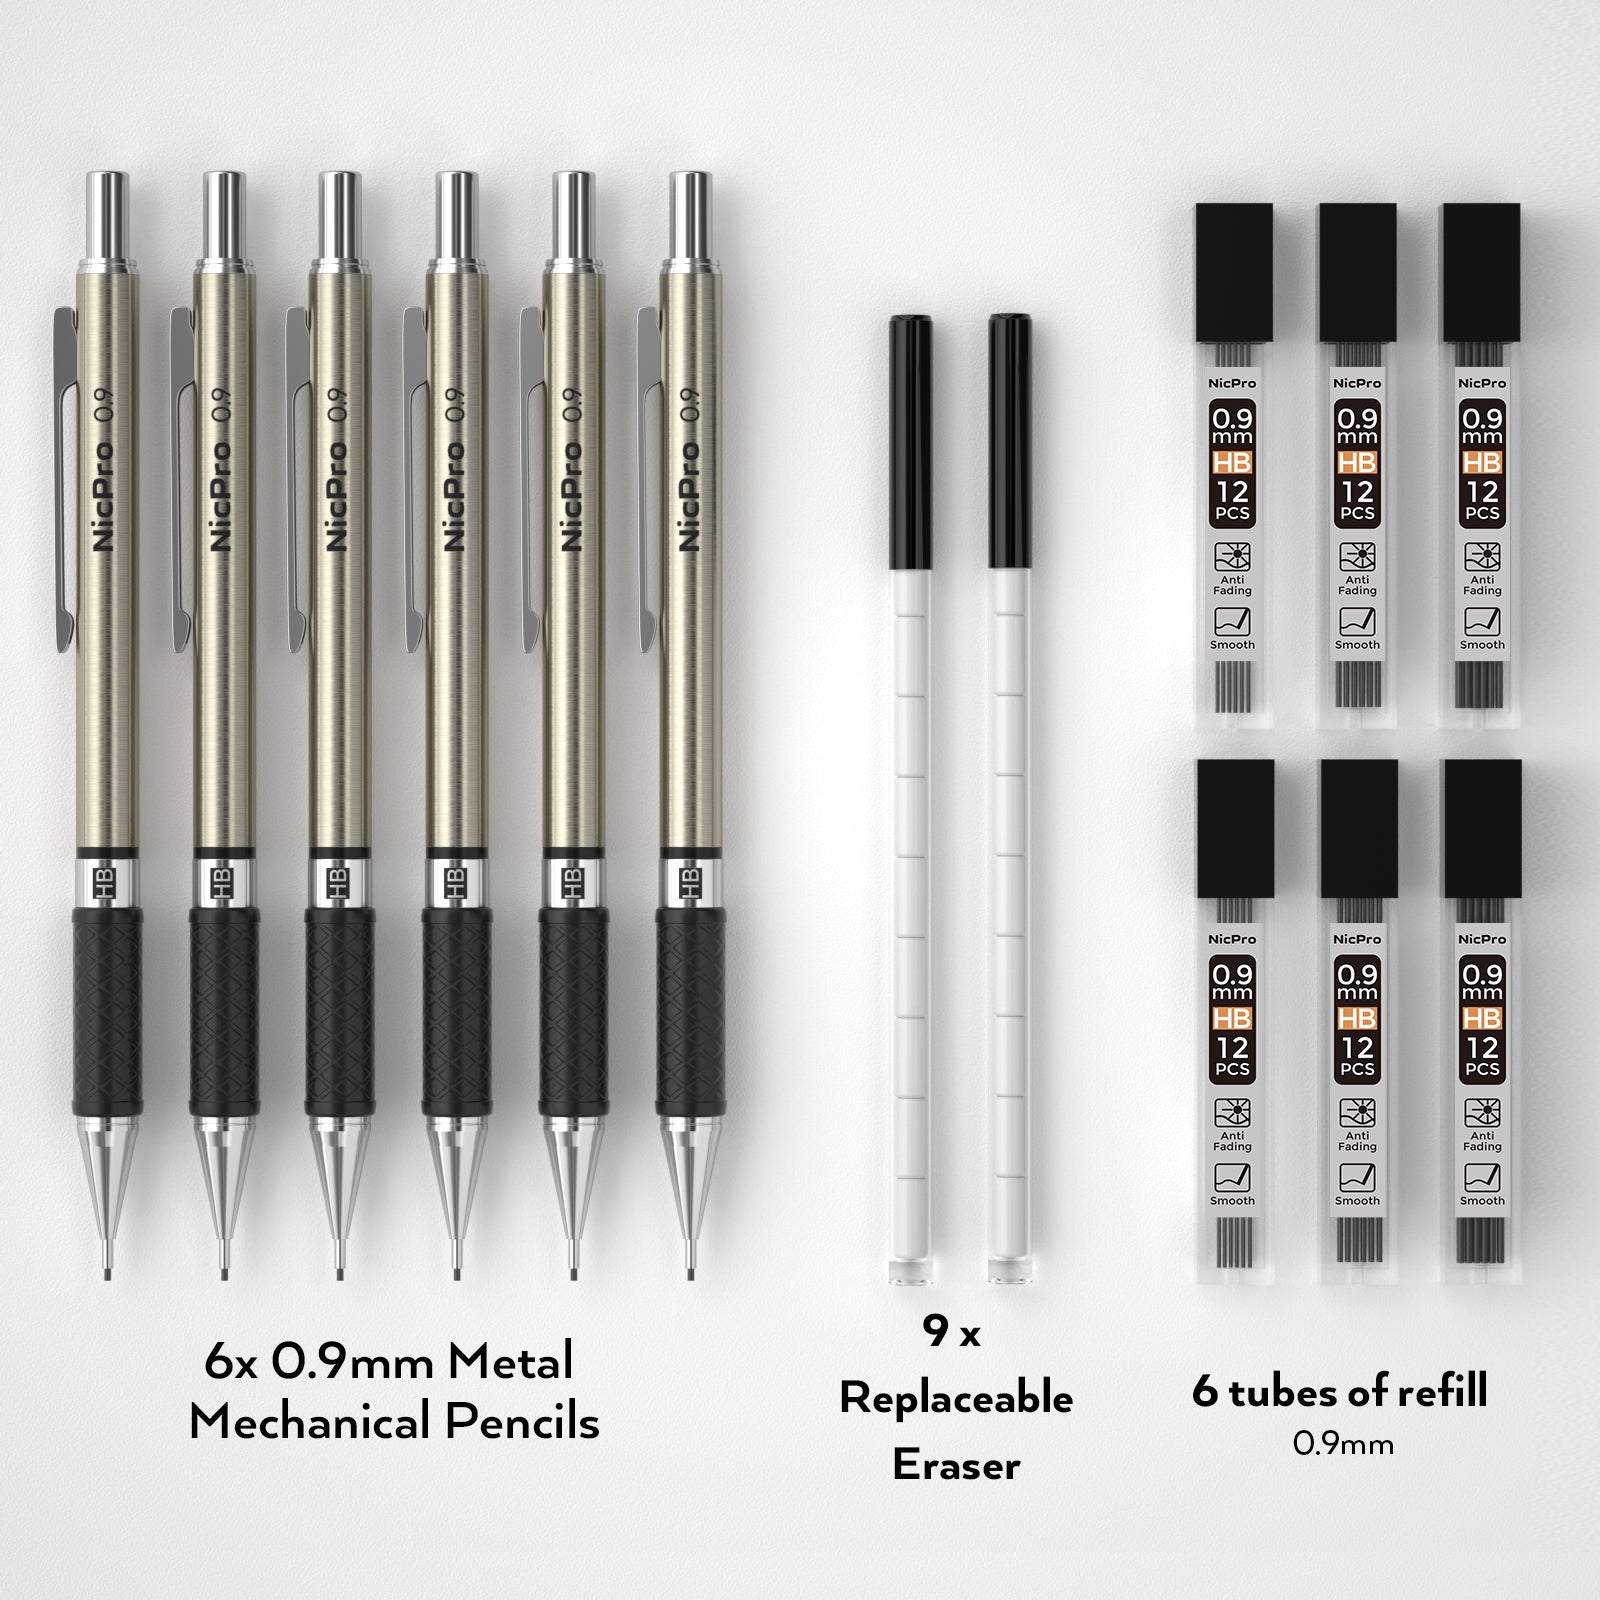 Nicpro 0.9 mm Art Mechanical Pencils Set in Gift Case, 6 PCS Metal Drafting Pencil 0.9mm with 6 Tube HB Lead Refills & 18 PCS Eraser Refills for Adults, Children, Artist Writing, Drawing, Sketching